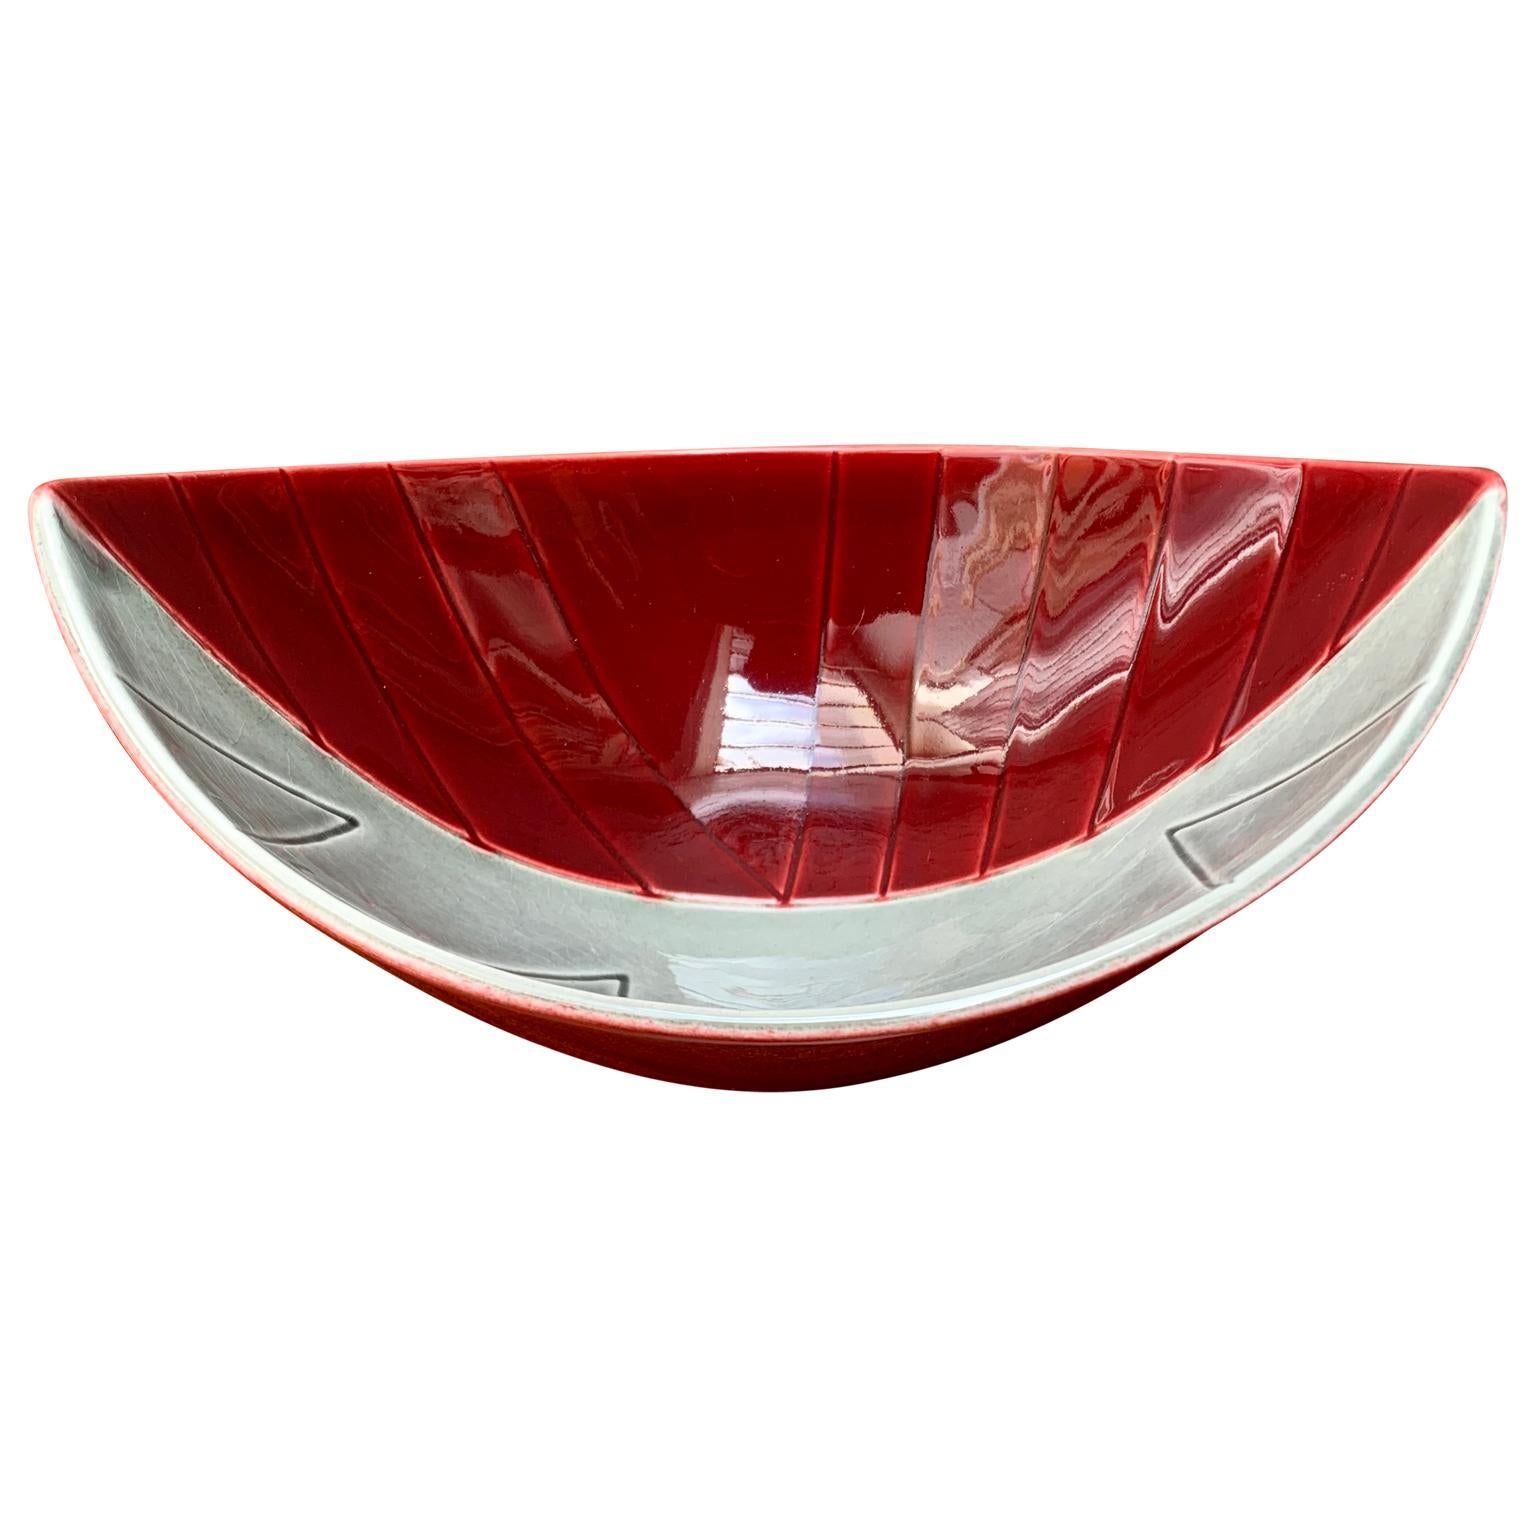 Red Ceramic California Bowl by Stålhane for Rörstran, Sweden Mid-Century Modern  In Good Condition For Sale In Haddonfield, NJ